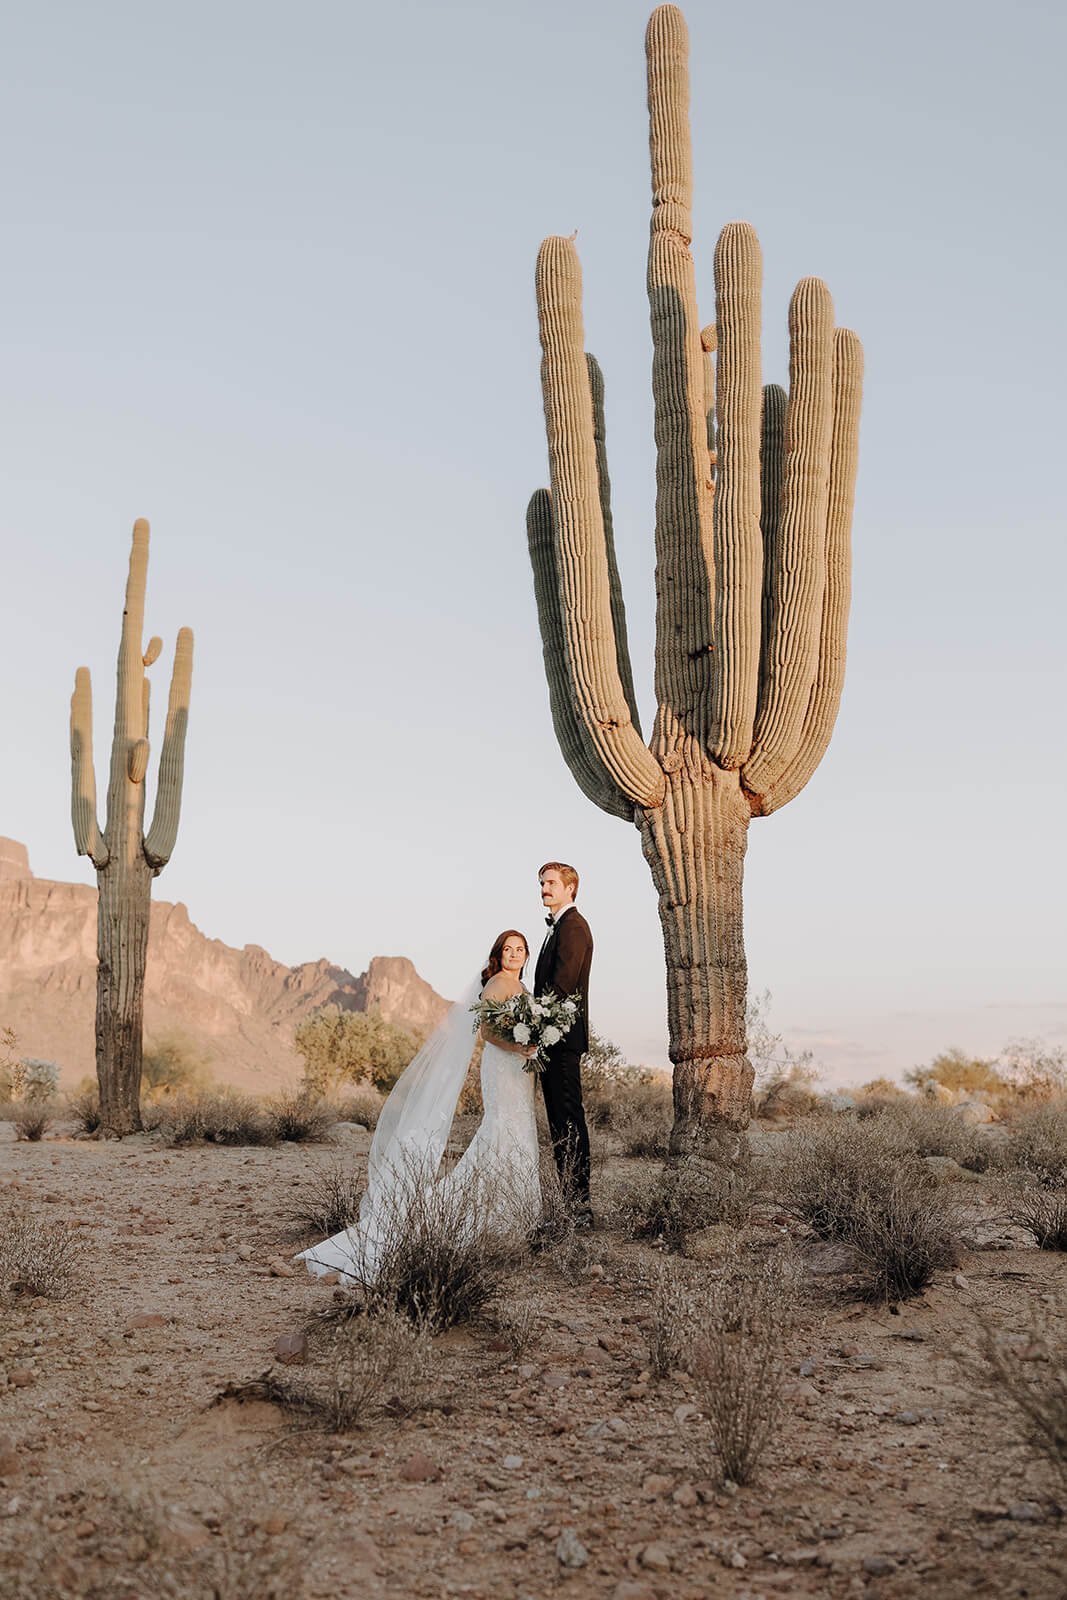 Bride and groom in front of a saguaro cactus for Arizona destination wedding